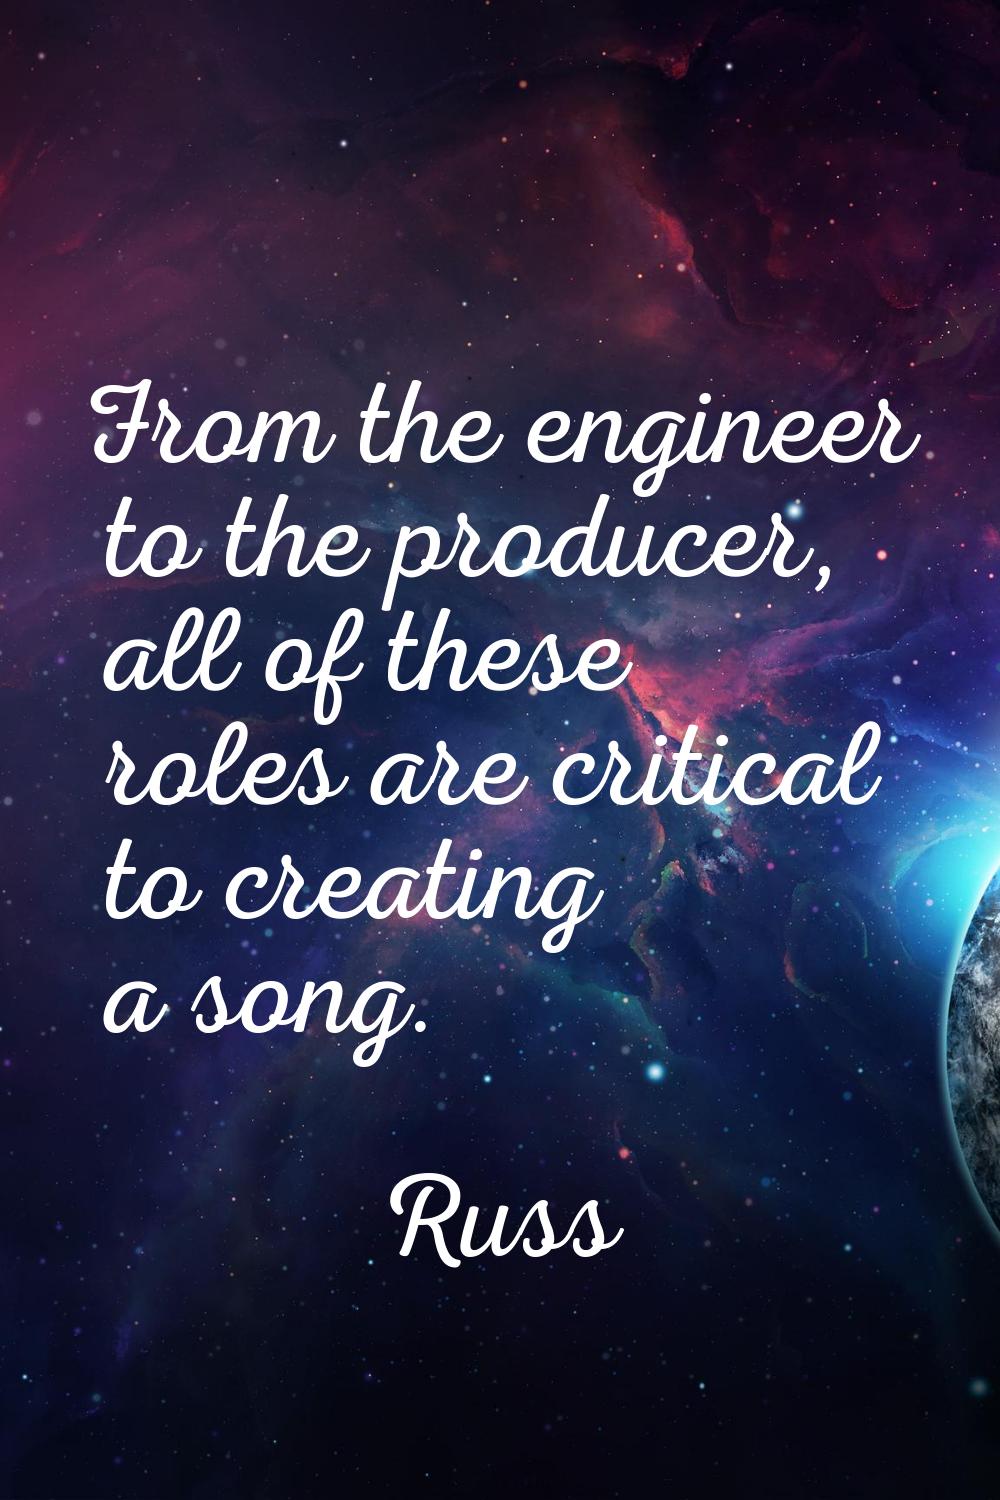 From the engineer to the producer, all of these roles are critical to creating a song.